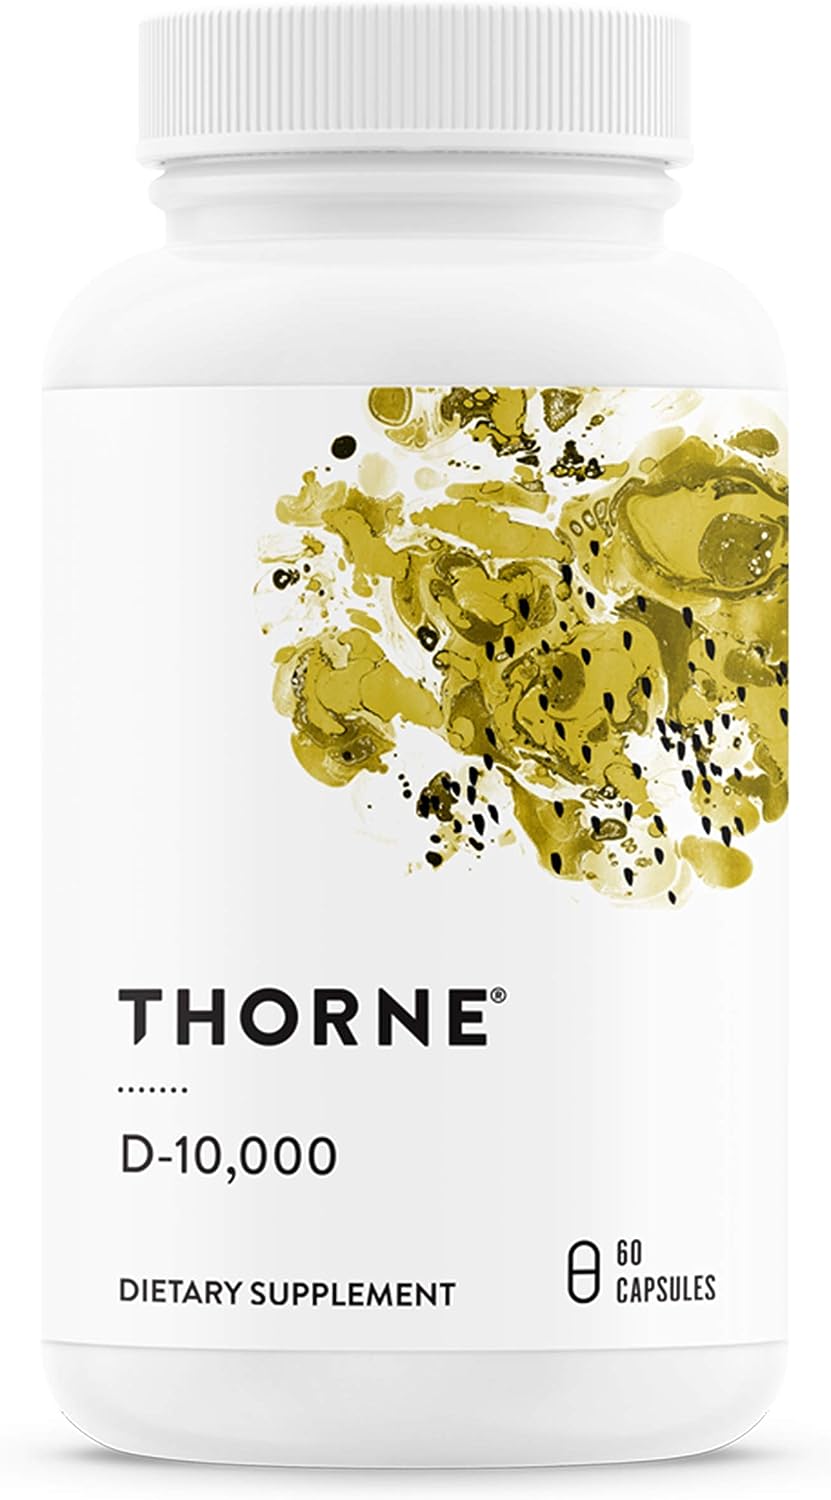 Thorne Vitamin D-10,000 - Vitamin D3 Supplement - 10,000 IU - Support Healthy Teeth, Bones, Muscles, Cardiovascular, and Immune Function - Gluten-Free, Dairy-Free, Soy-Free - 60 Capsules